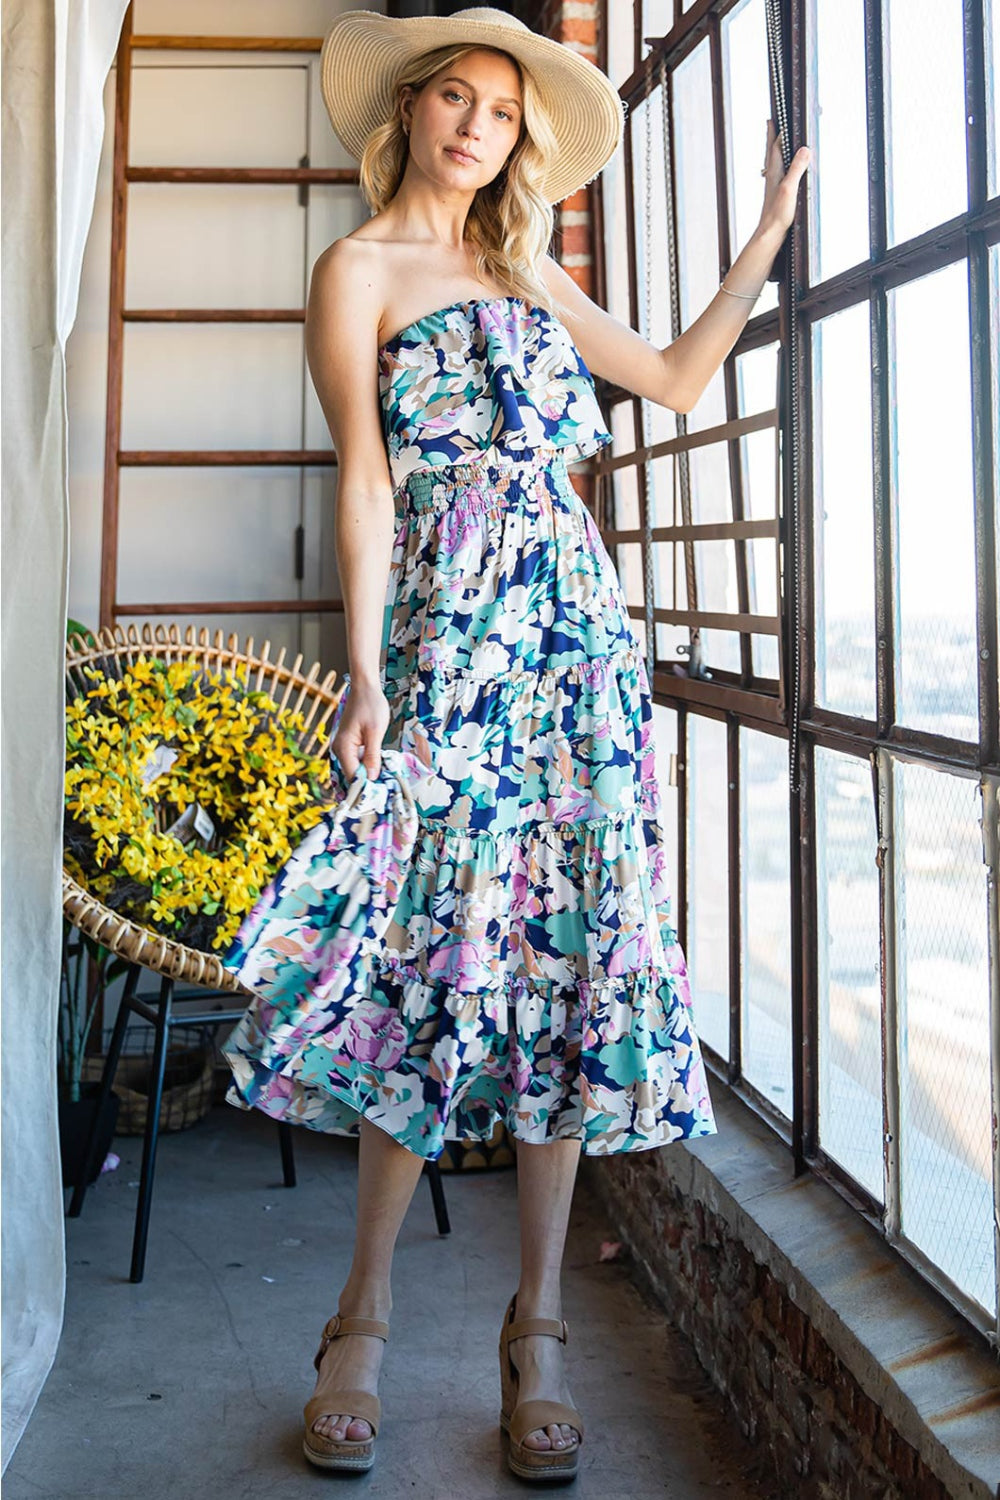 Summer Soiree Staple: Cotton Bleu Ruffled Floral Midi Dress for Women - Perfect for Beach Weddings and Party Attendees